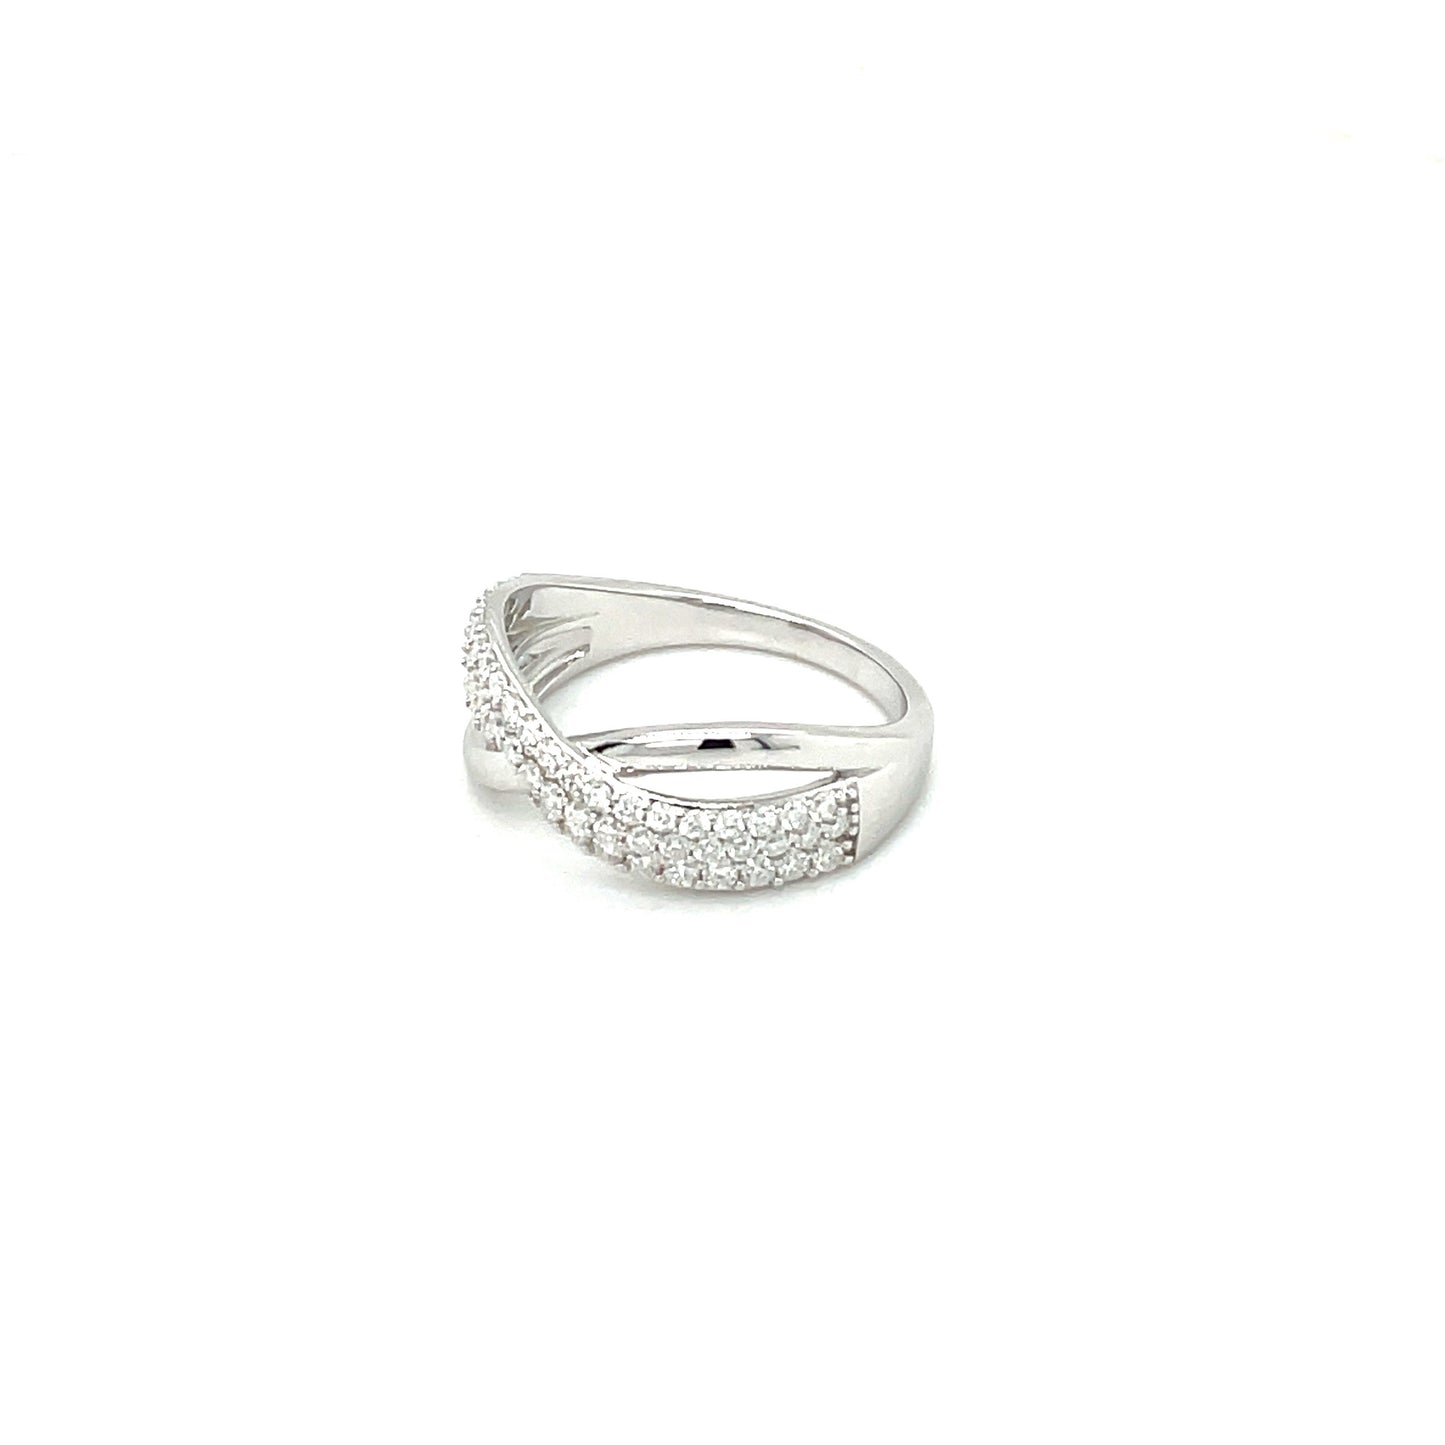 Through Thick & Thin Platinum Plated, Sterling Silver, Criss-Cross Ring w/Moissanite Gemstones & High Polish.